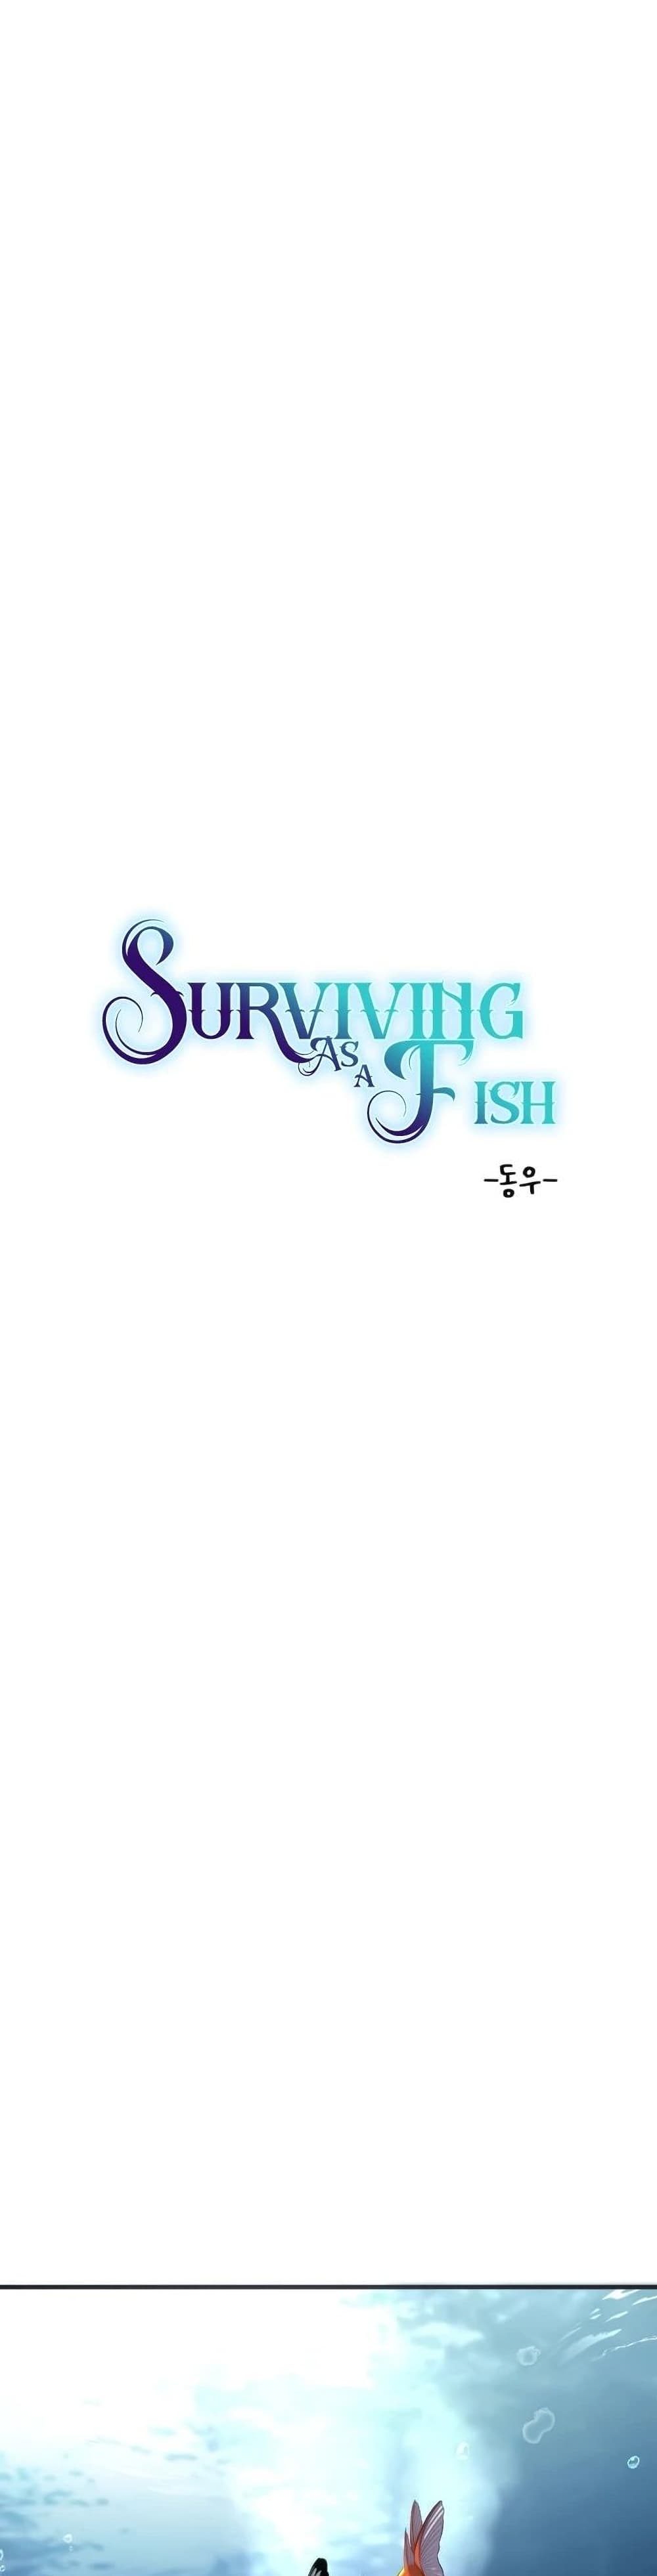 Surviving As a Fish 20-20